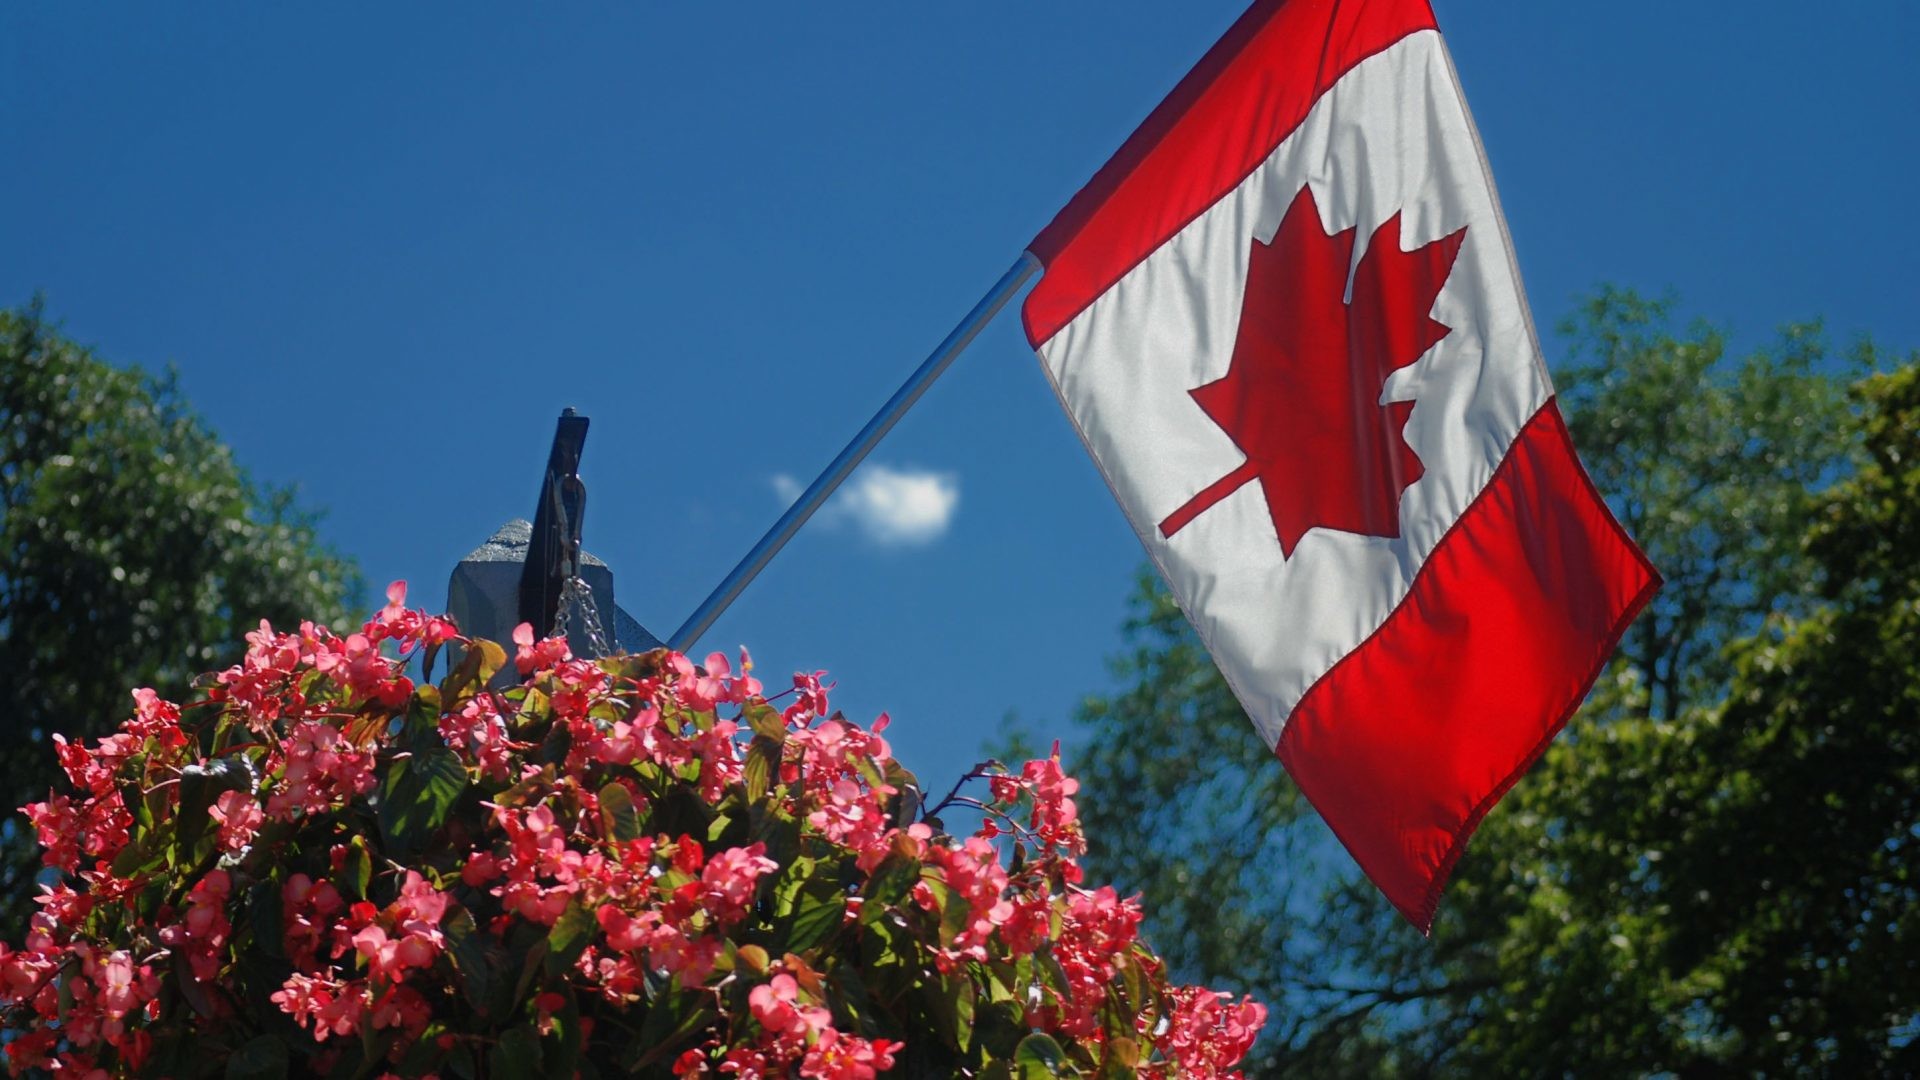 1920x1080 Flag Tag - Sky Flowers Flag Canada Summer Wallpaper Download Hd for HD 16:9